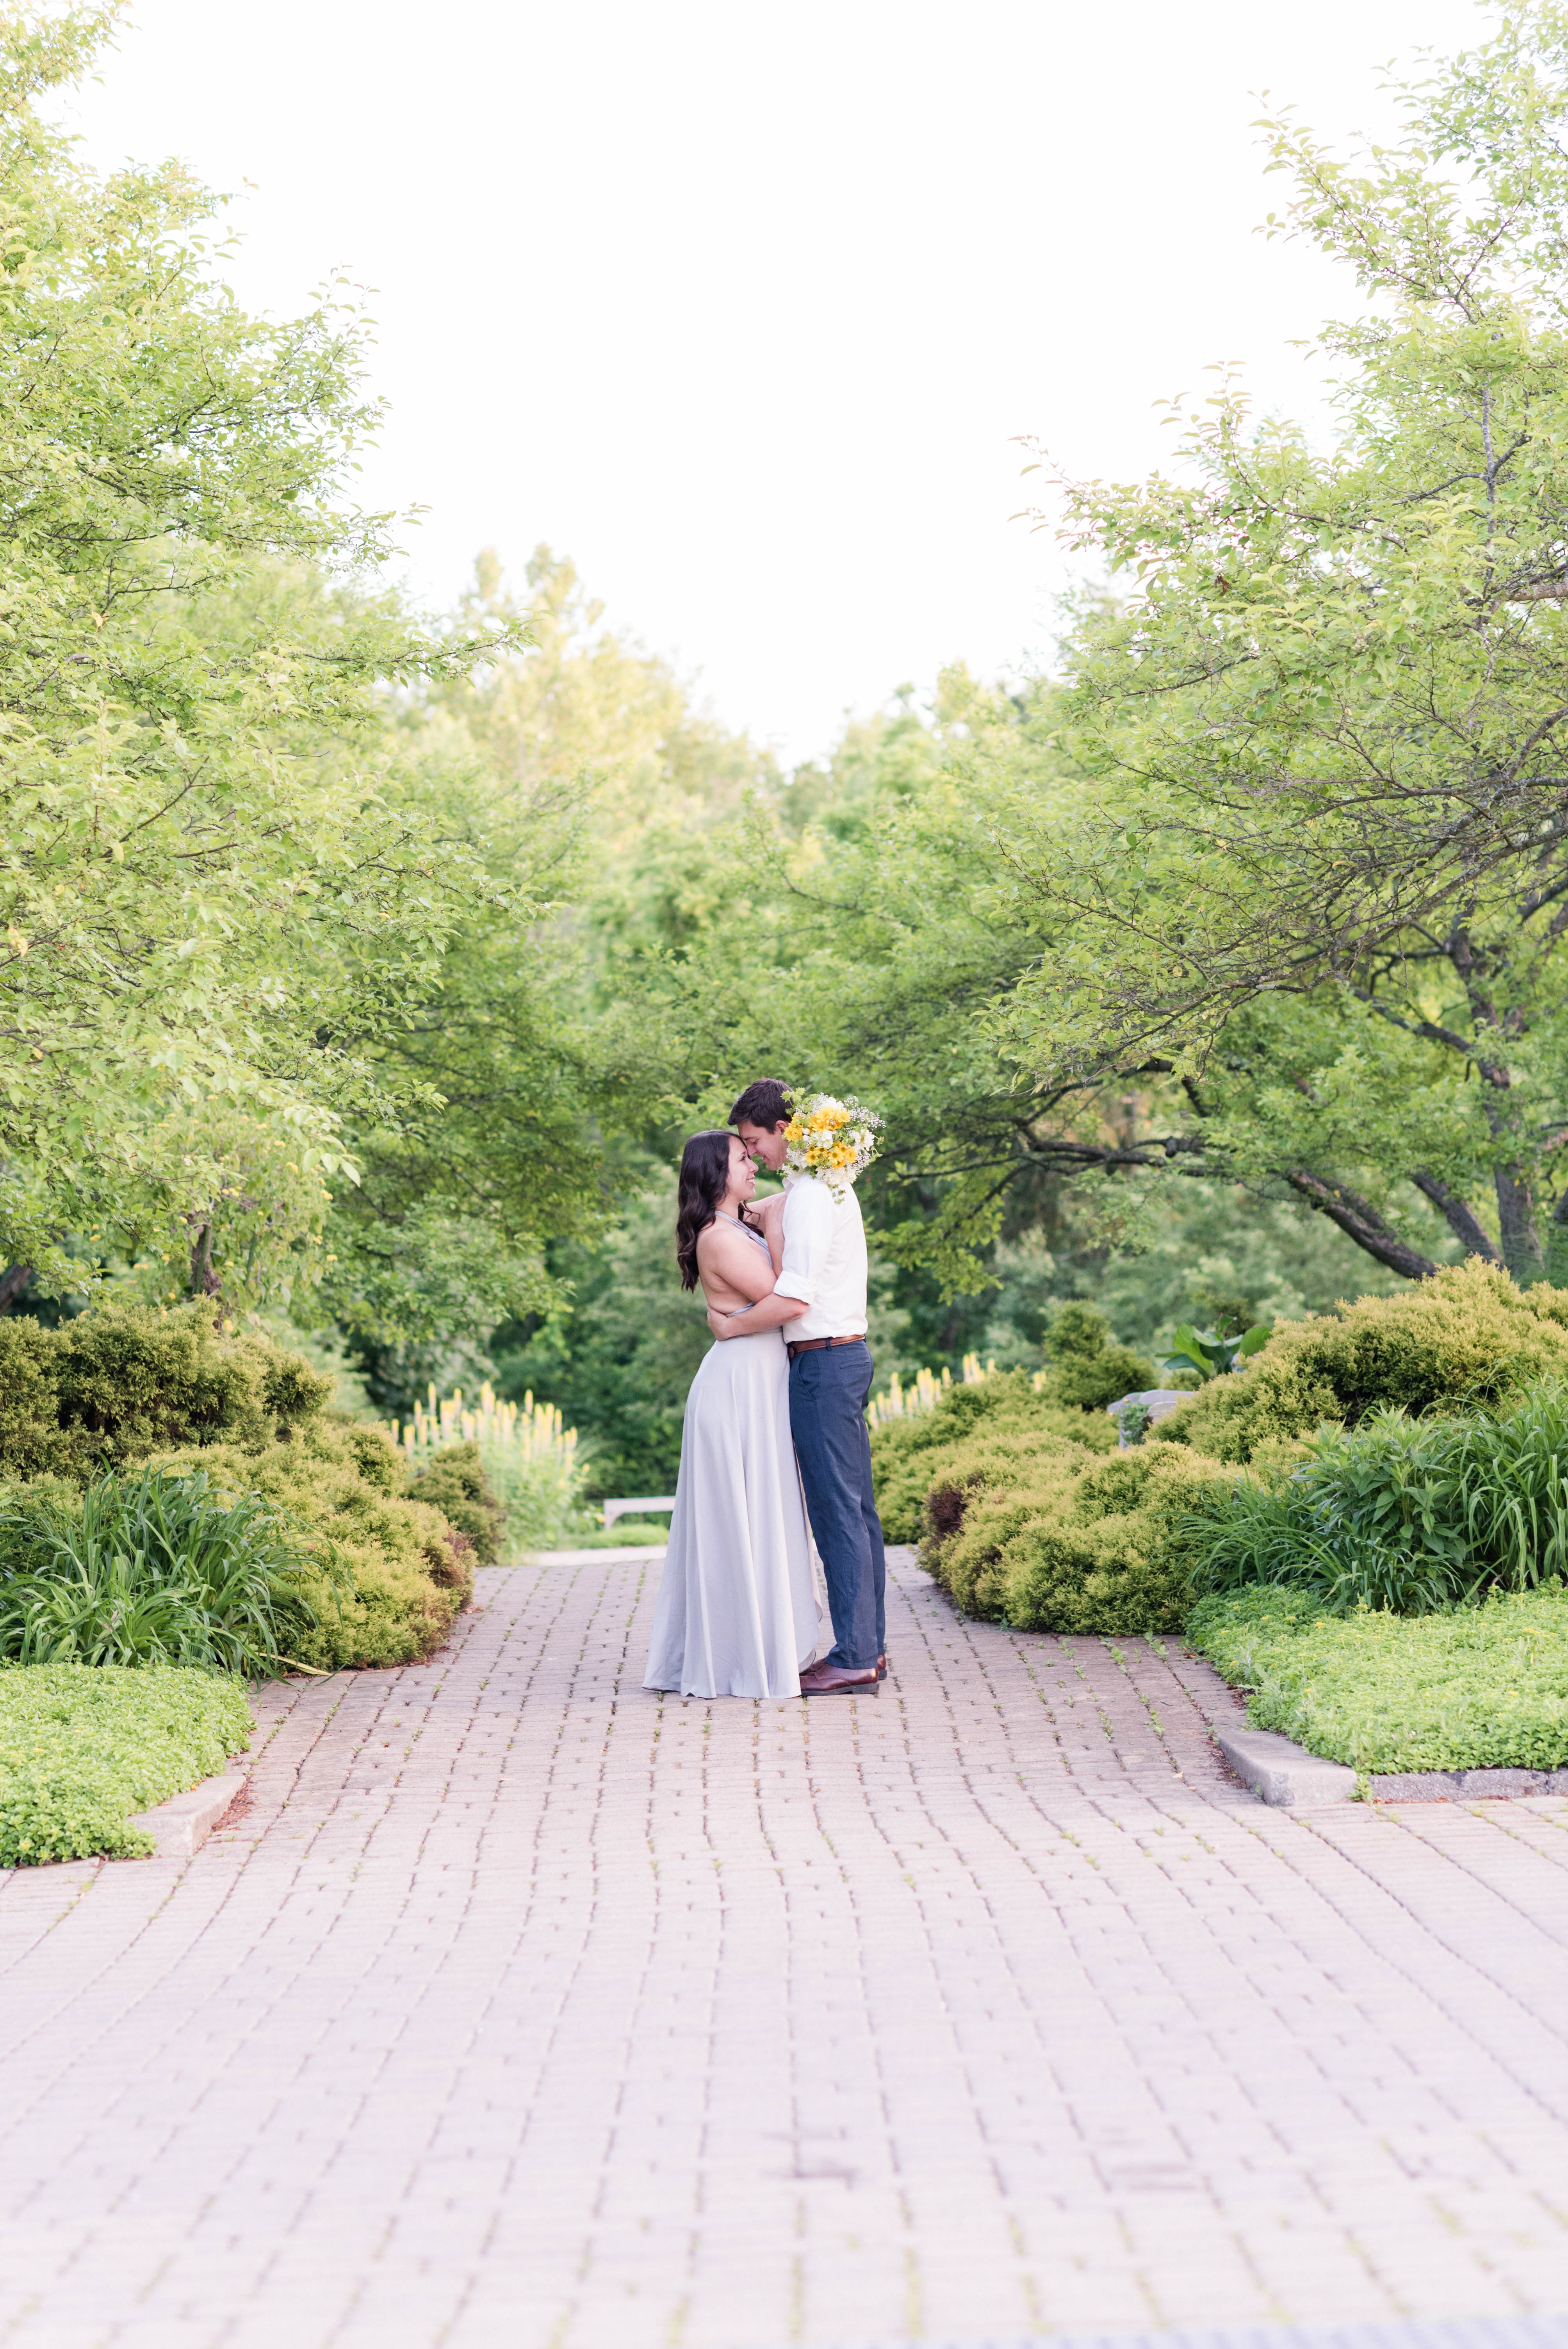 Anniversary Session At Inniswood Gardens - Westerville, Ohio